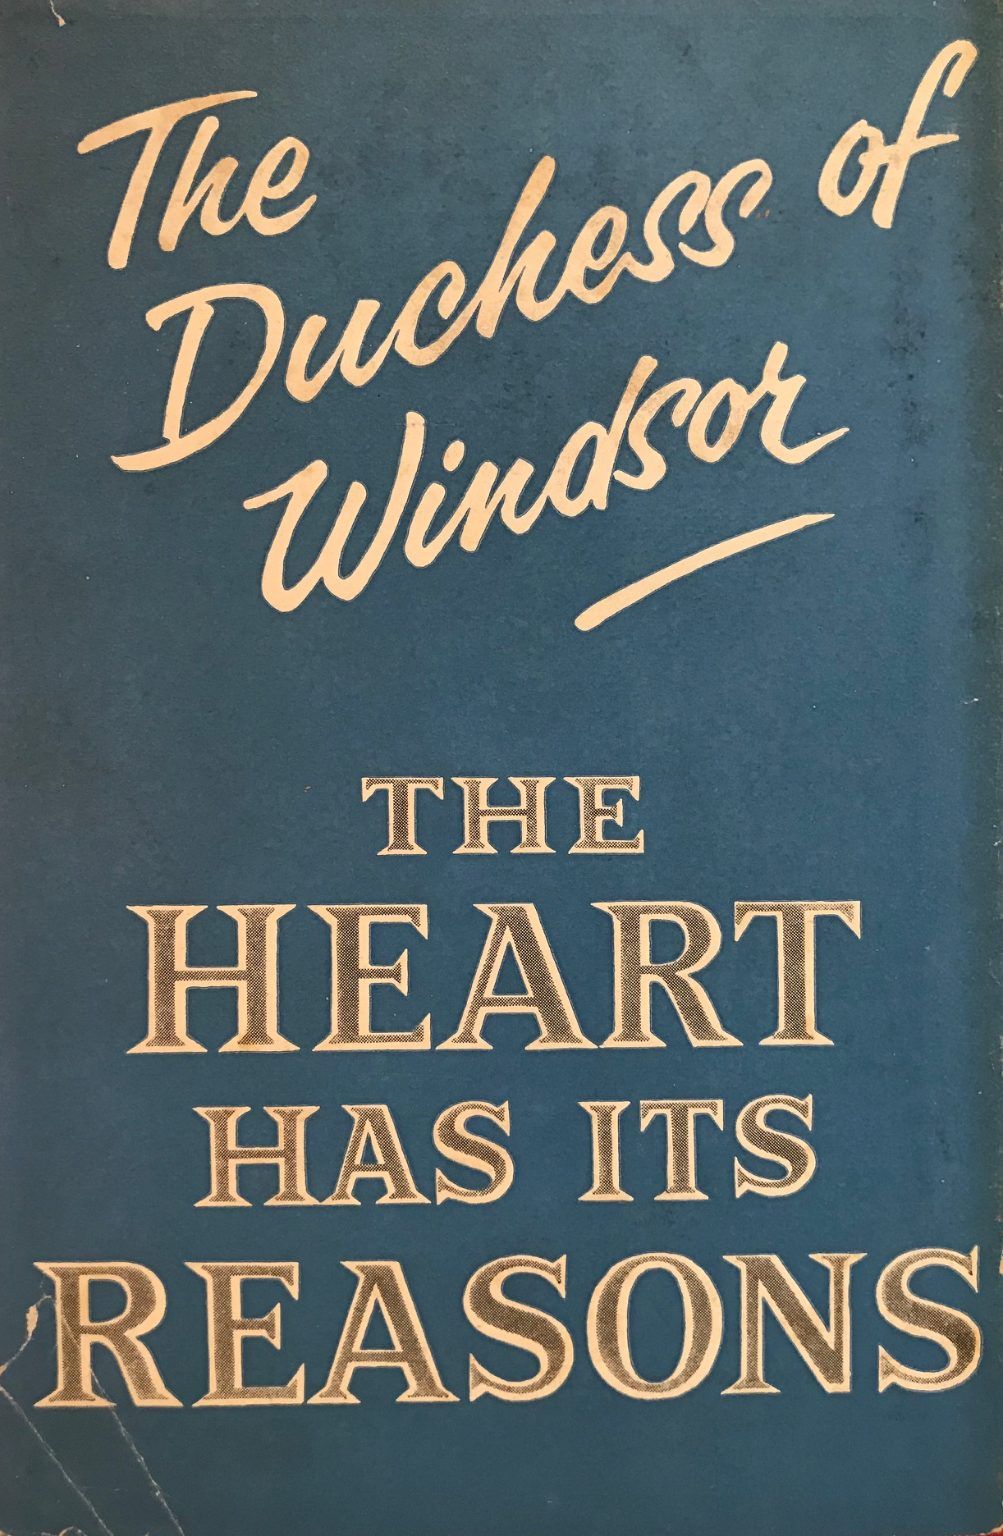 THE HEART HAS ITS REASONS: The Memoirs of The Duchess of Windsor